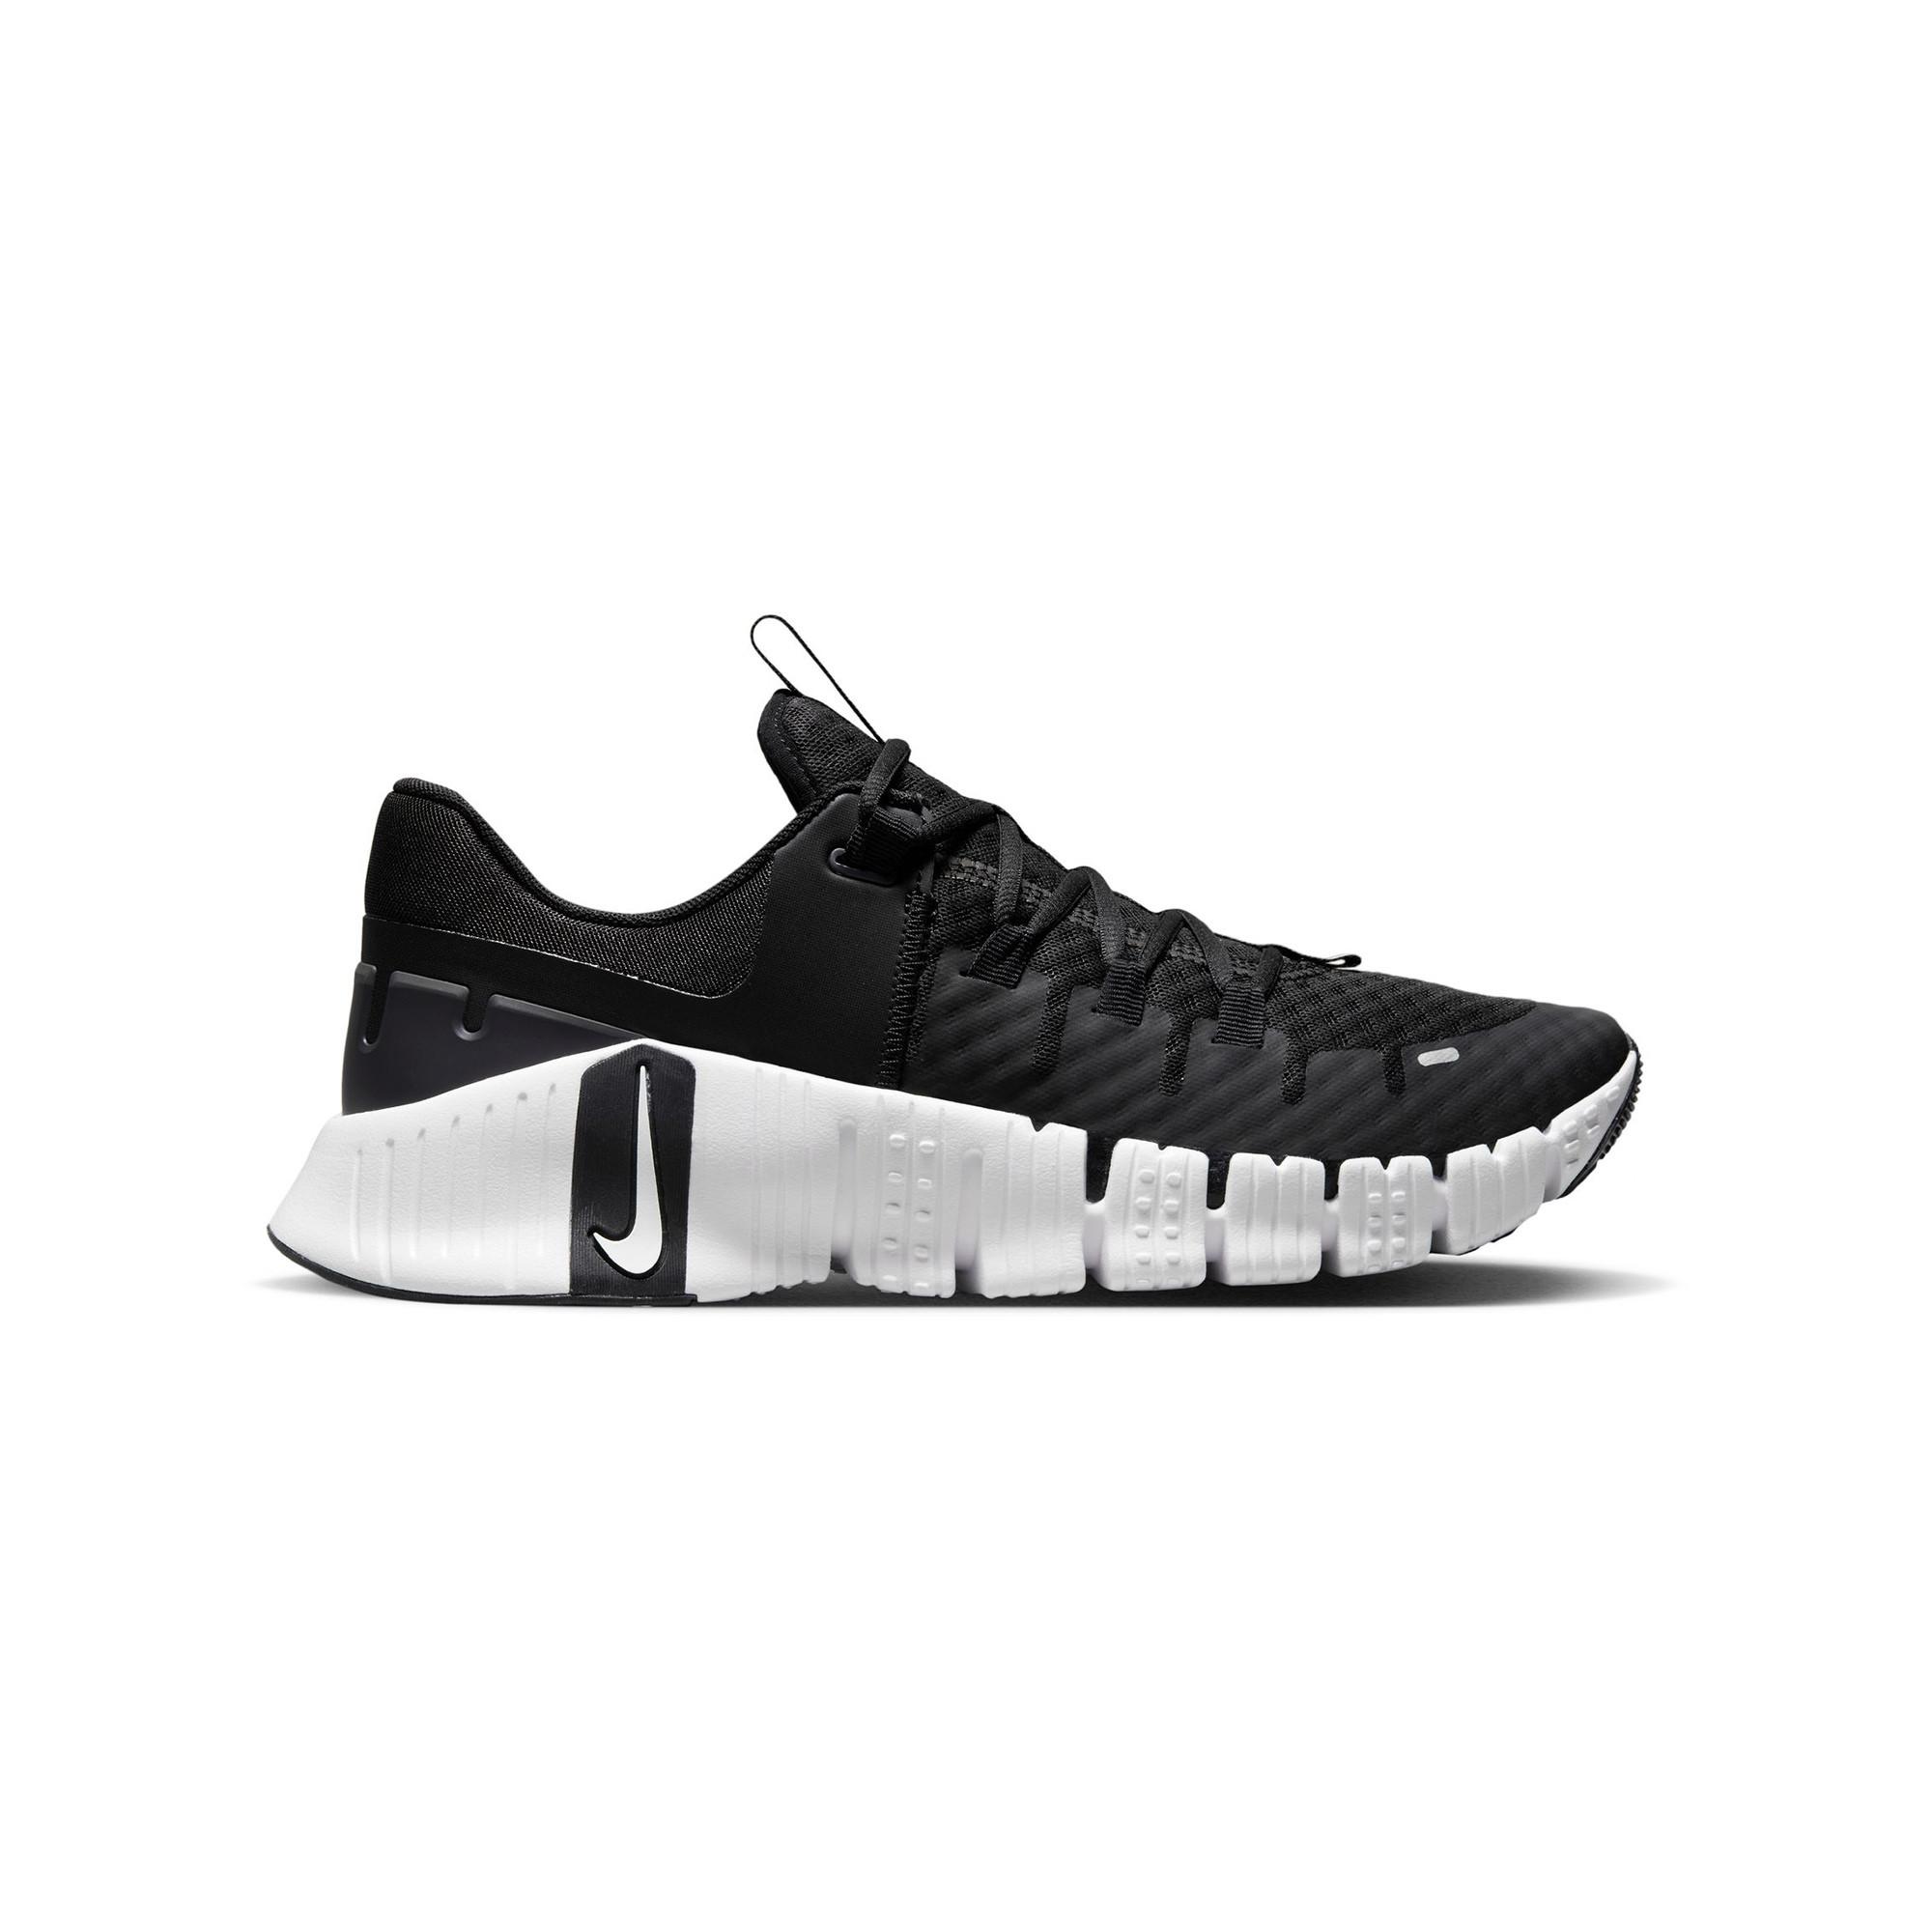 NIKE Free Metcon 5 Chaussures fitness 